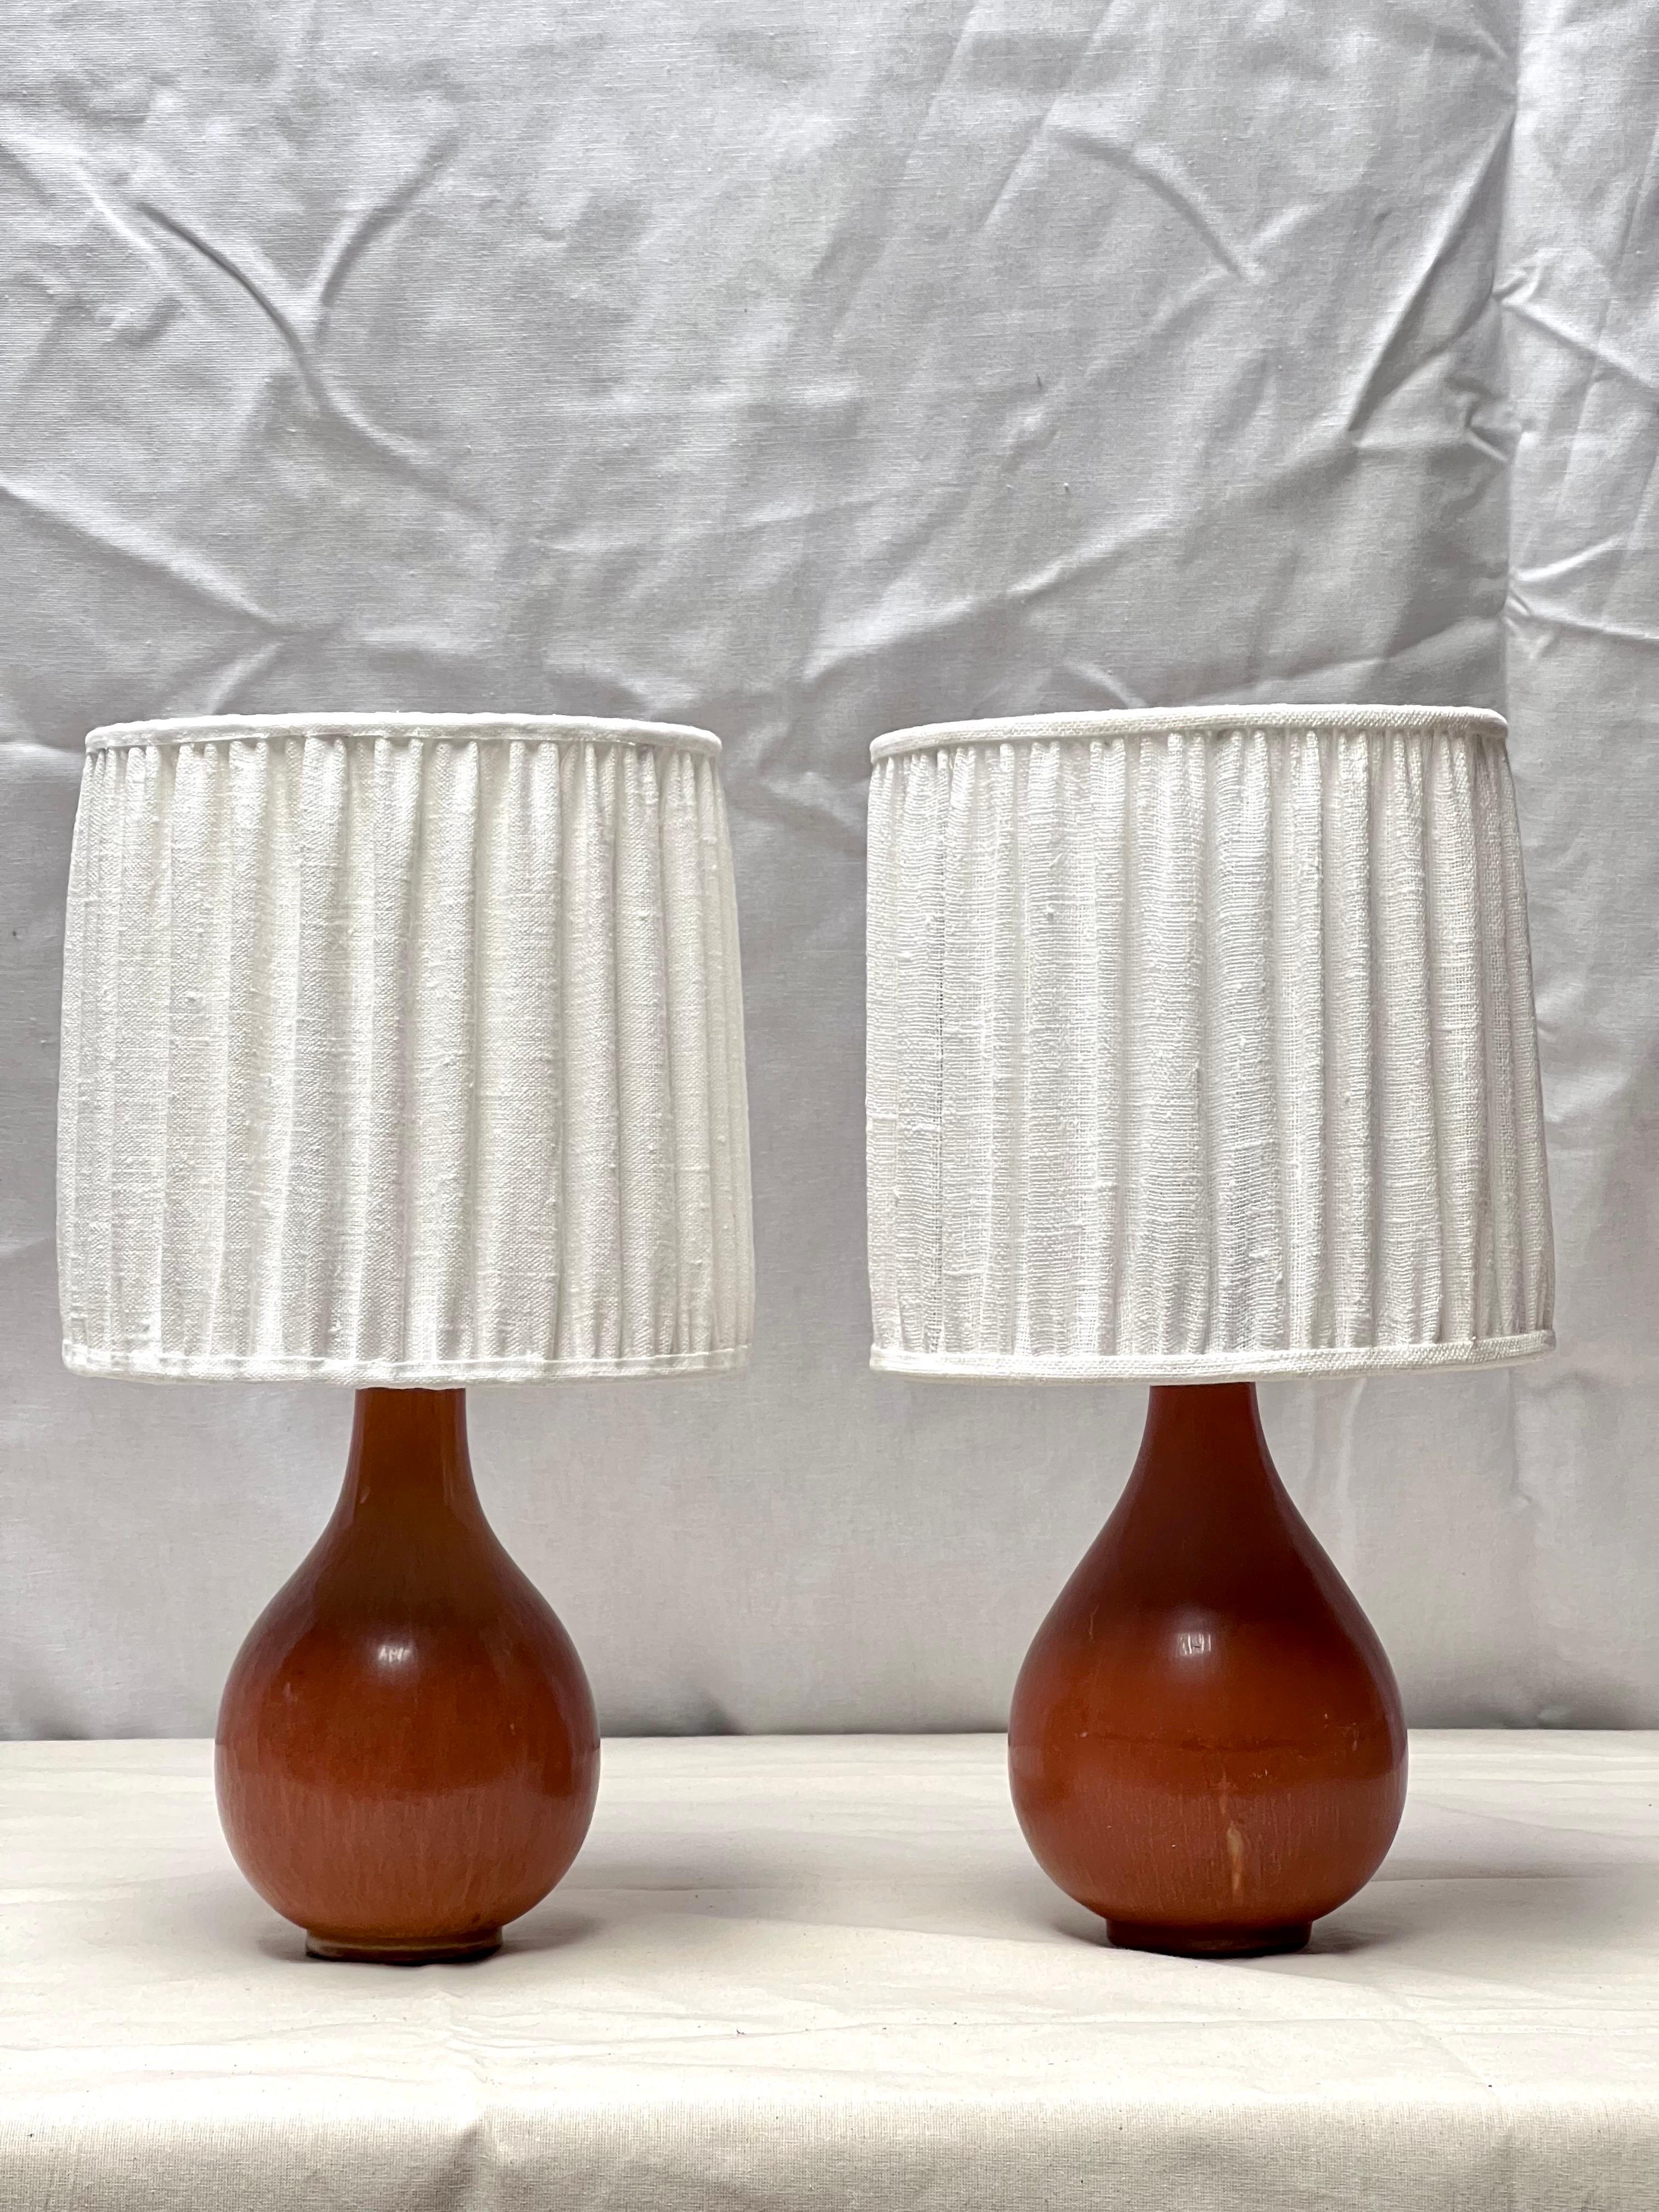 This is an elegant and rare pair of table lamps. Each hand made creation is unique so it's a pair but with slight differences which make every lamps unique. These are real lamps, not vases that was later transformed.

Each lamp received a new